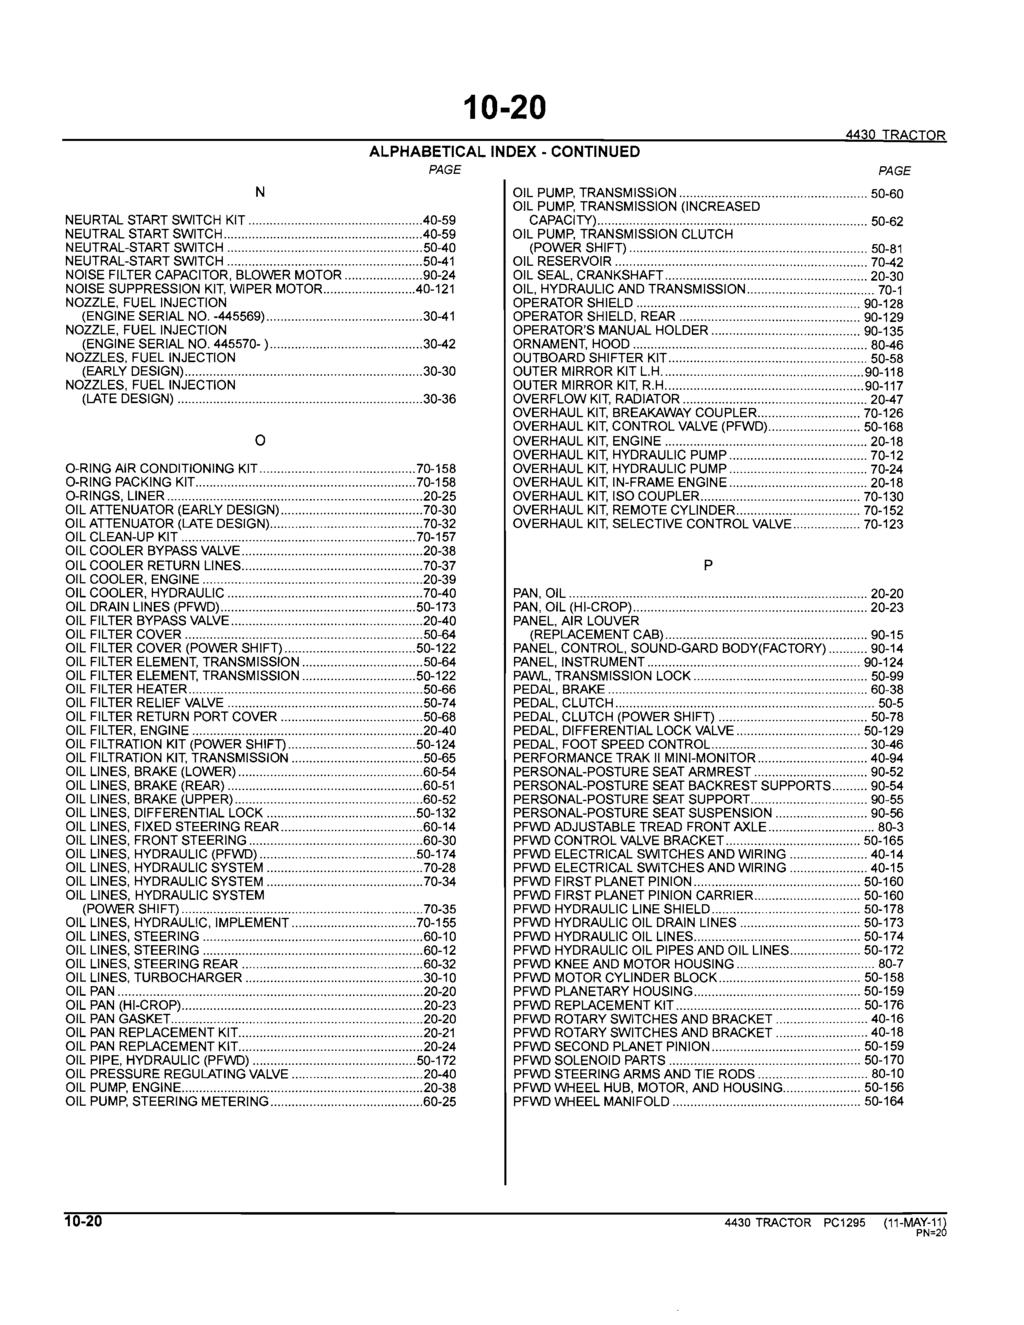 10-20 ALPHABETICAL INDEX - CONTINUED PAGE 4430 TRACTOR N OIL PUMP, TRANSMISSION... 50-60 OIL PUMP, TRANSMISSION (INCREASED NEURTAL START SWITCH KIT...40-59 CAPACiTY)... 50-62 NEUTRAL START SWITCH.